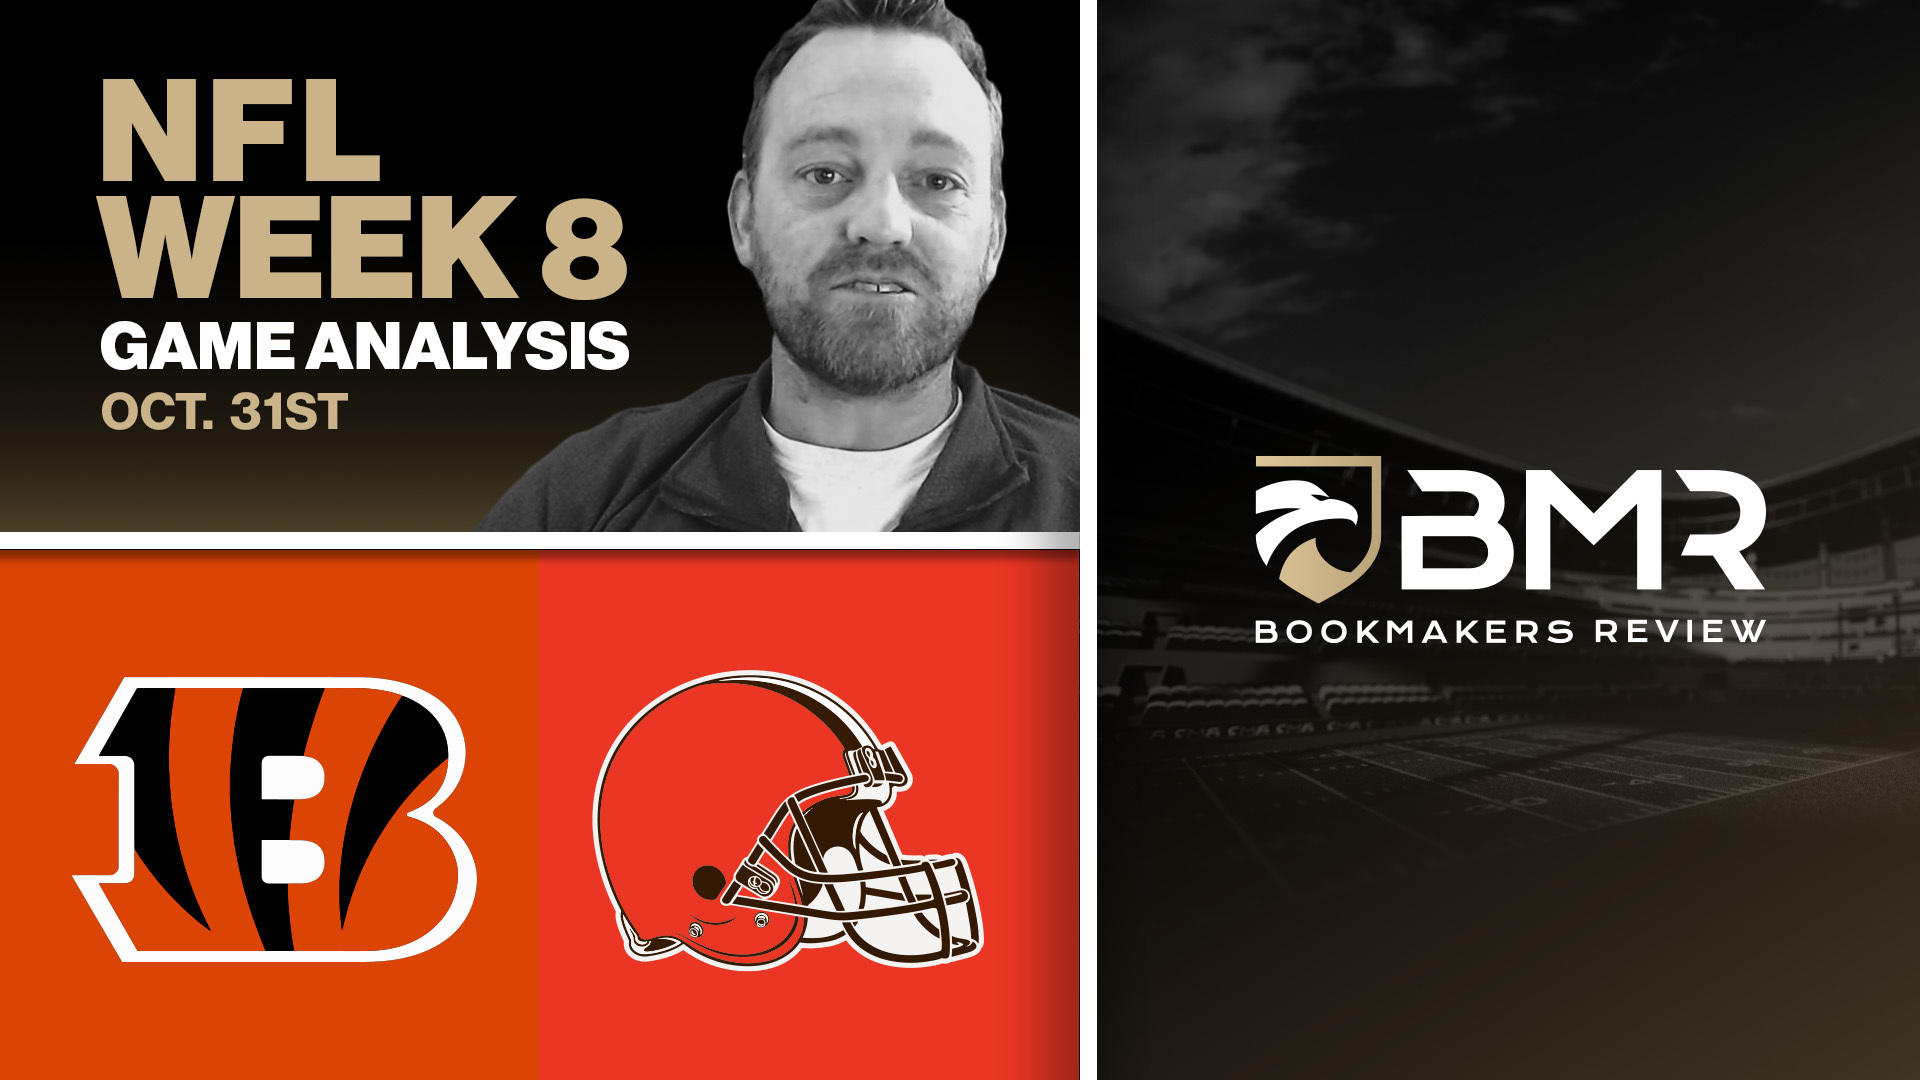 Bengals vs. Browns &#8211; NFL Week 8 Pick by Kyle Purviance (Oct. 31st)